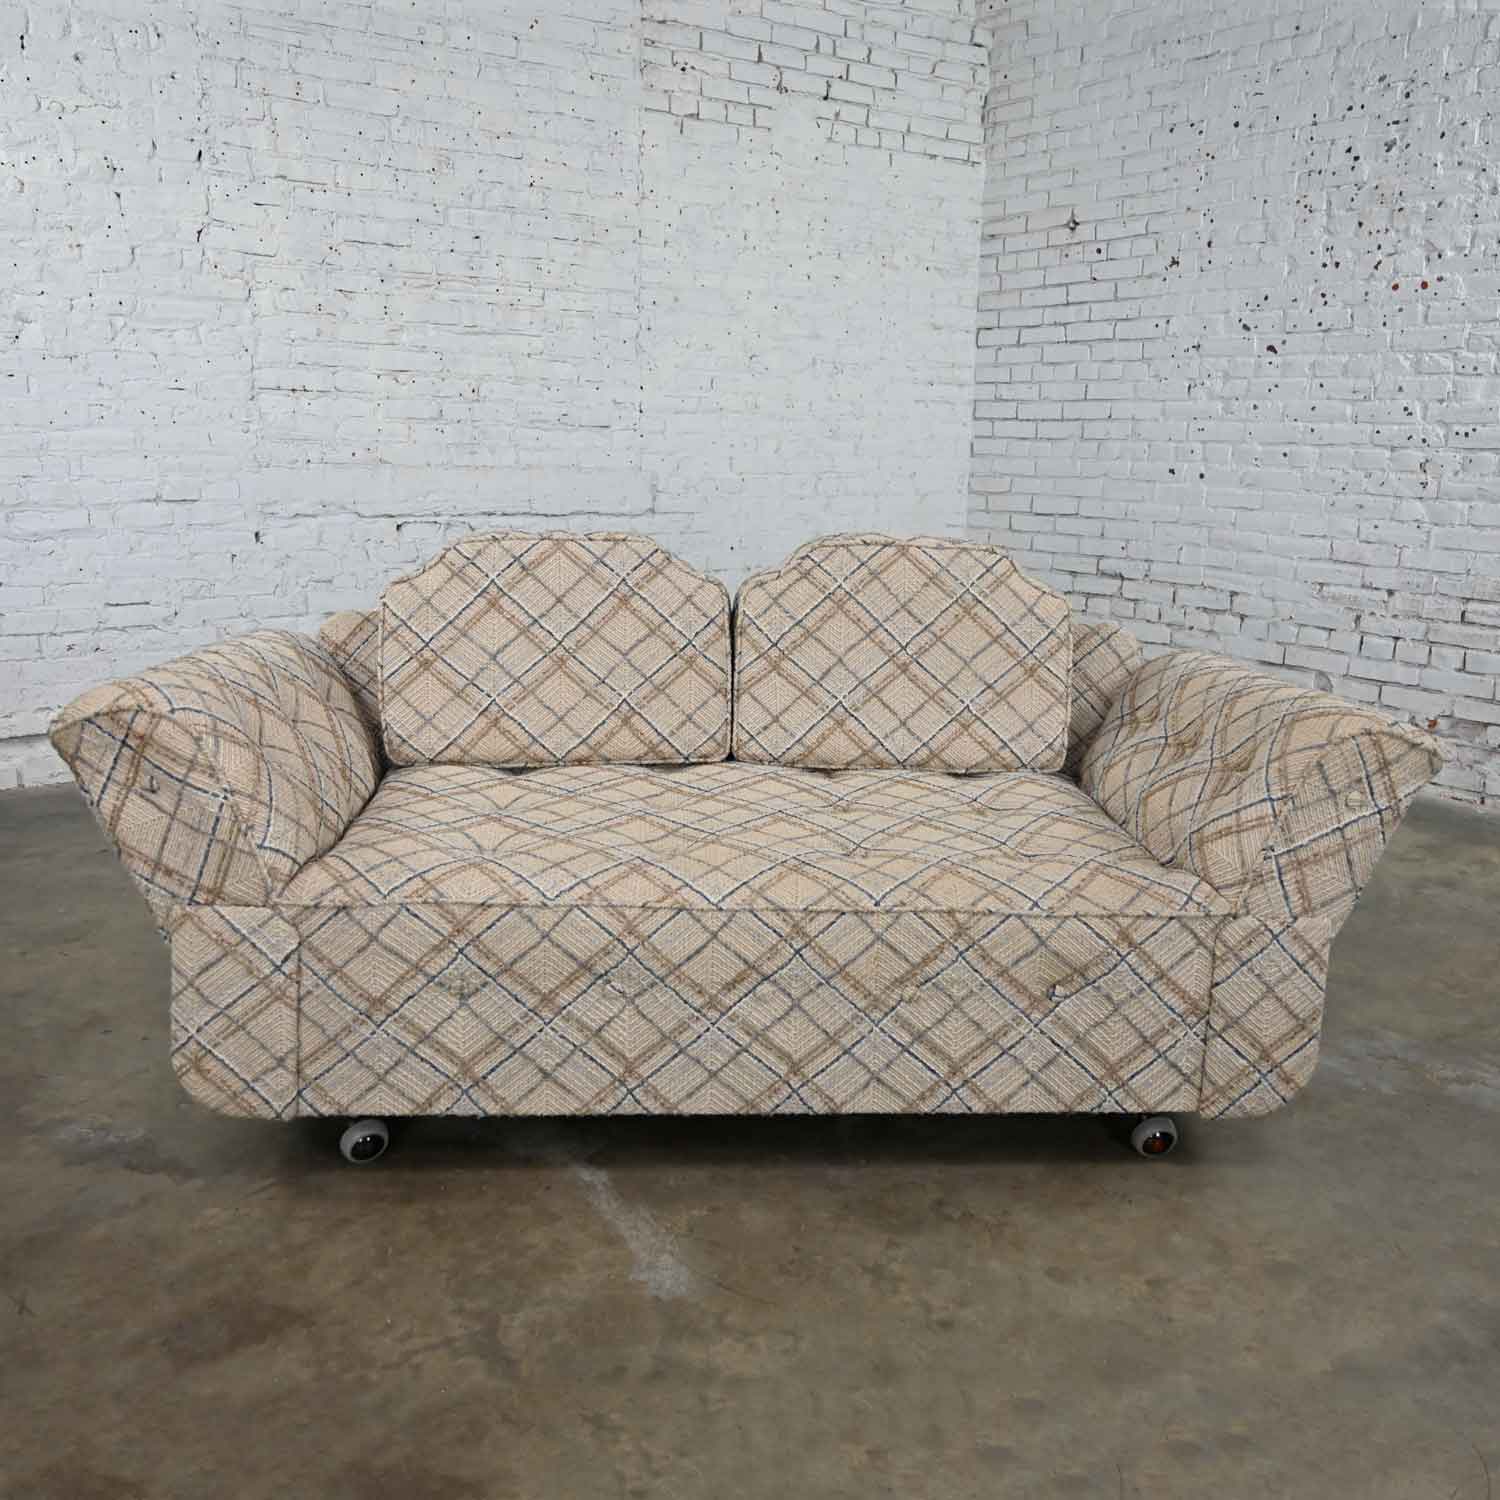 Modern to MCM Oatmeal Blue & Brown Plaid Pattern Convertible Love Seat Sofa Daybed or Chaise